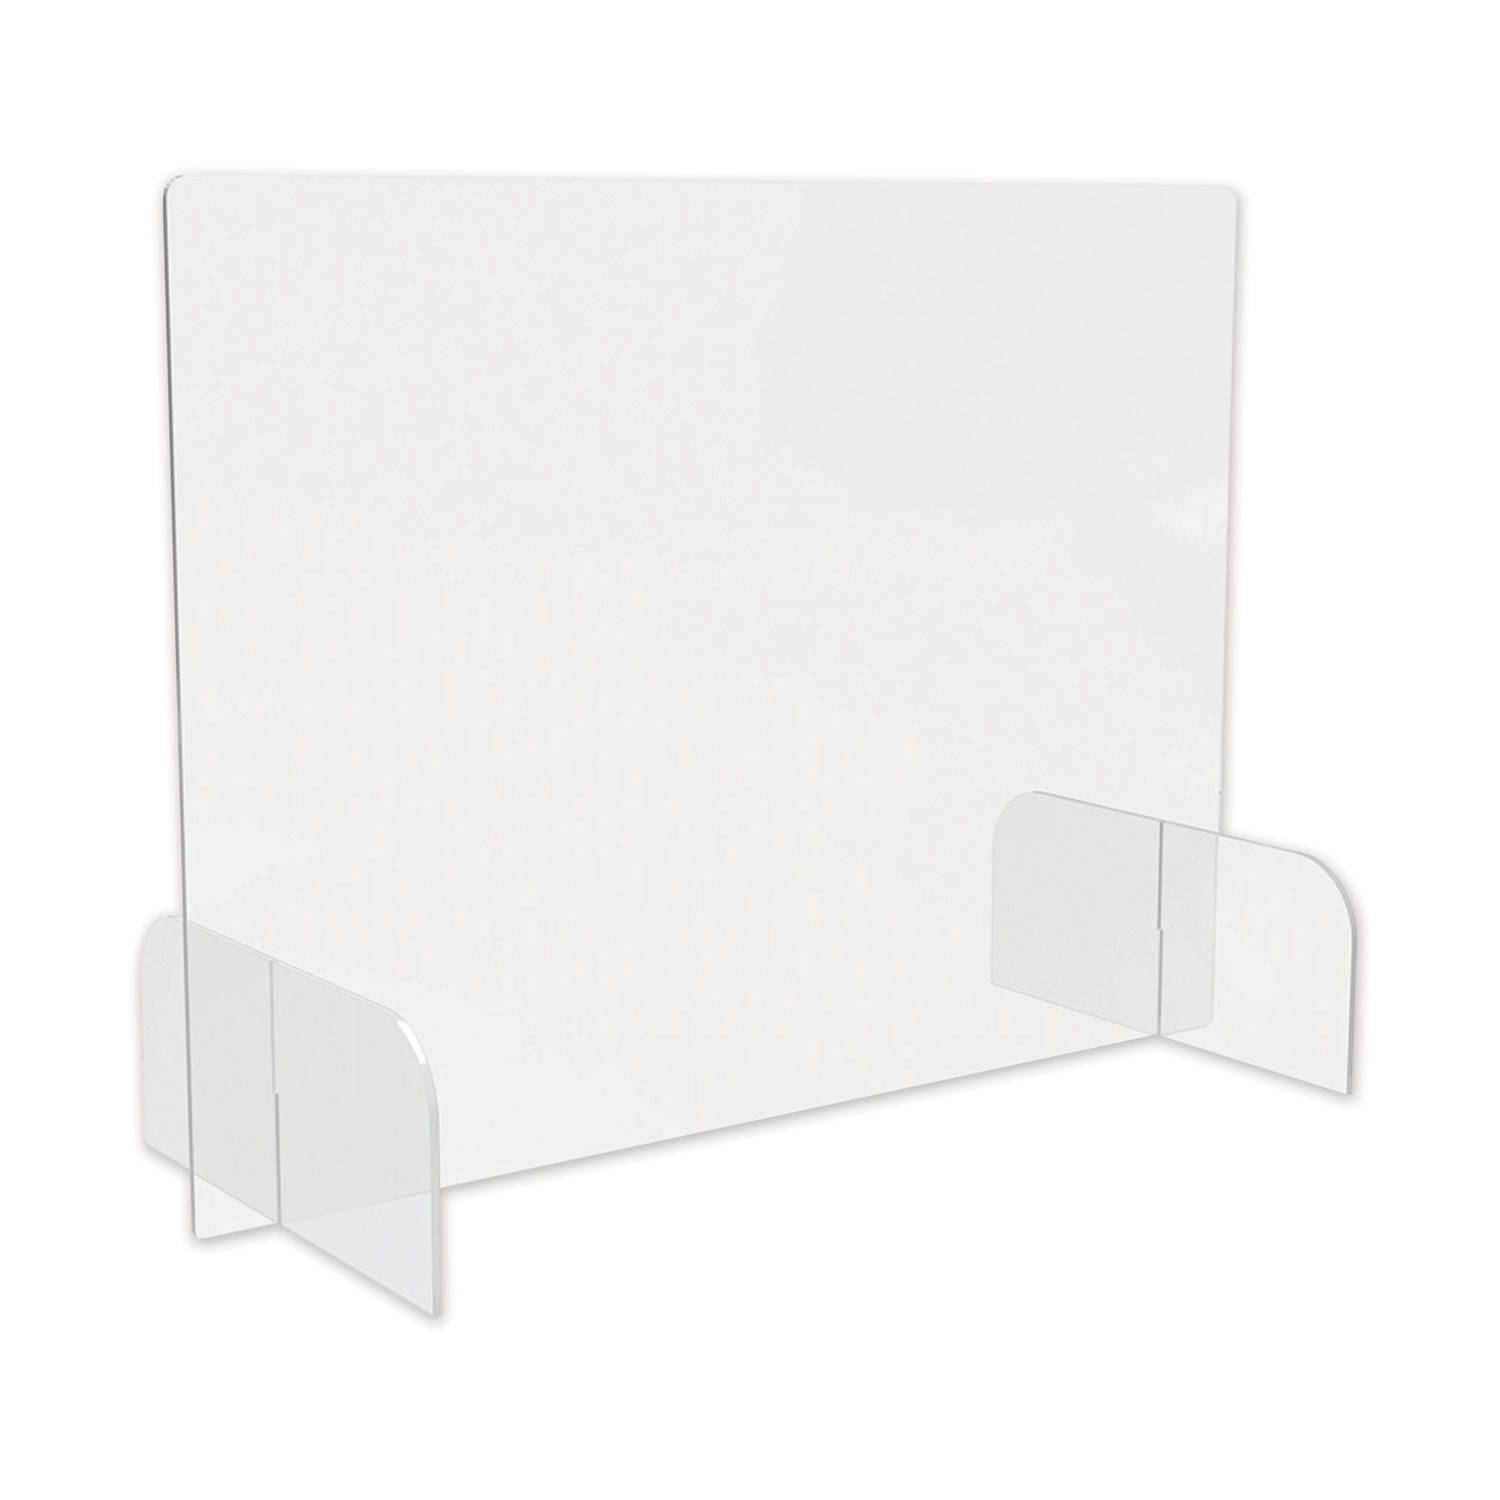  Deflecto Counter Top Barrier with Full Shield and Feet, 31 x 14 x 23, Polycarbonate, Clear, 2/Carton  (DEFPBCTPC3123B) 